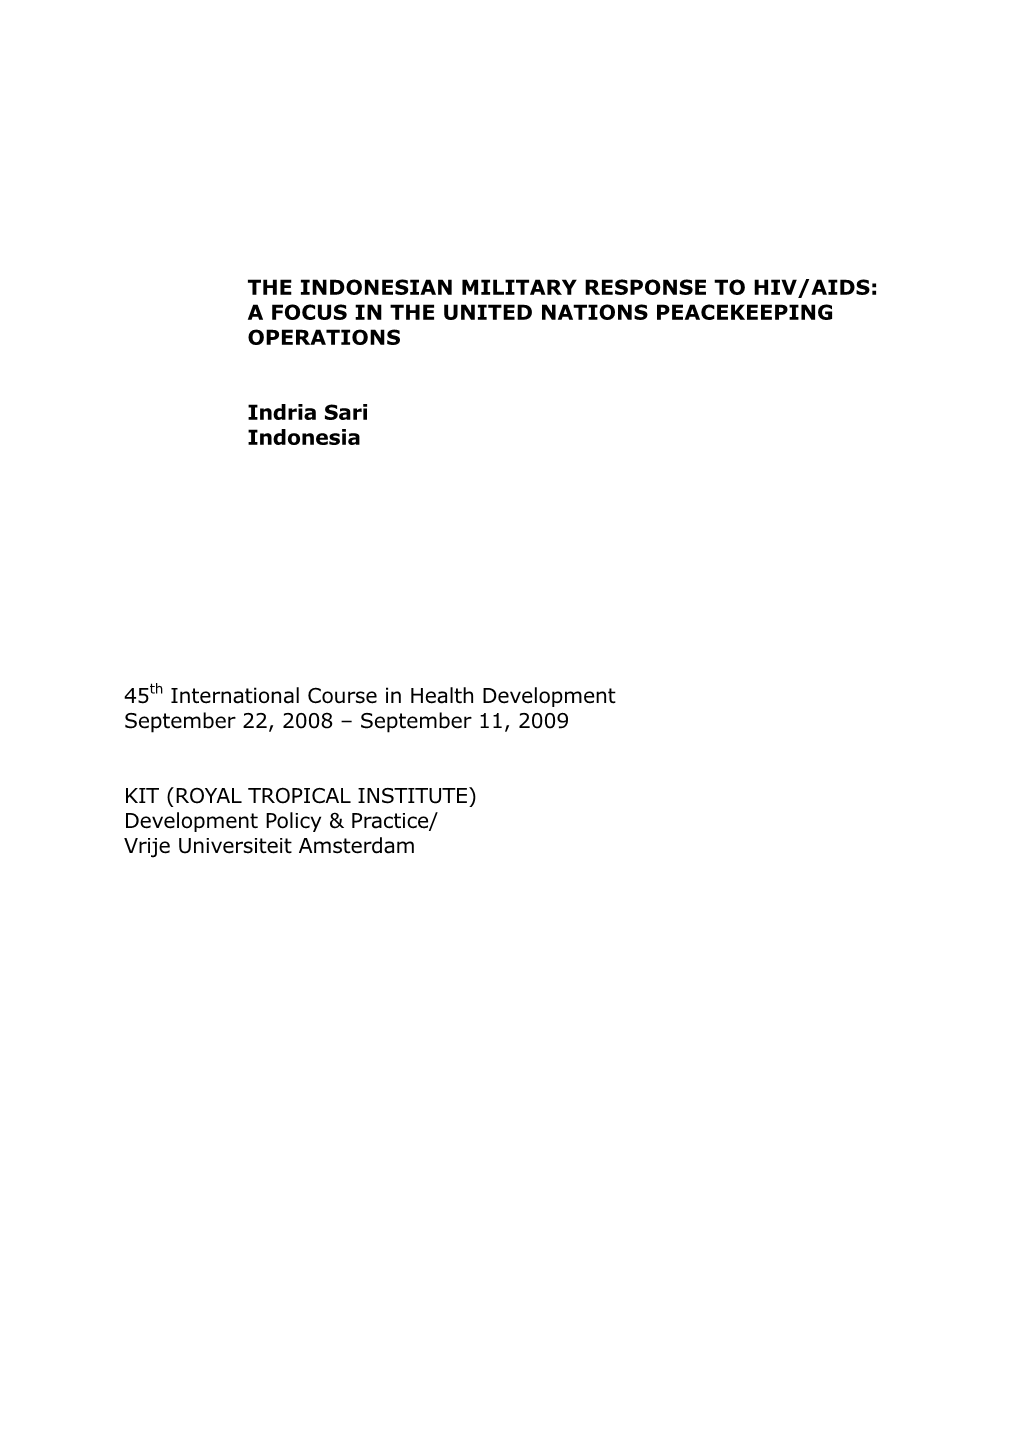 The Indonesian Military Response to Hiv/Aids: a Focus in the United Nations Peacekeeping Operations